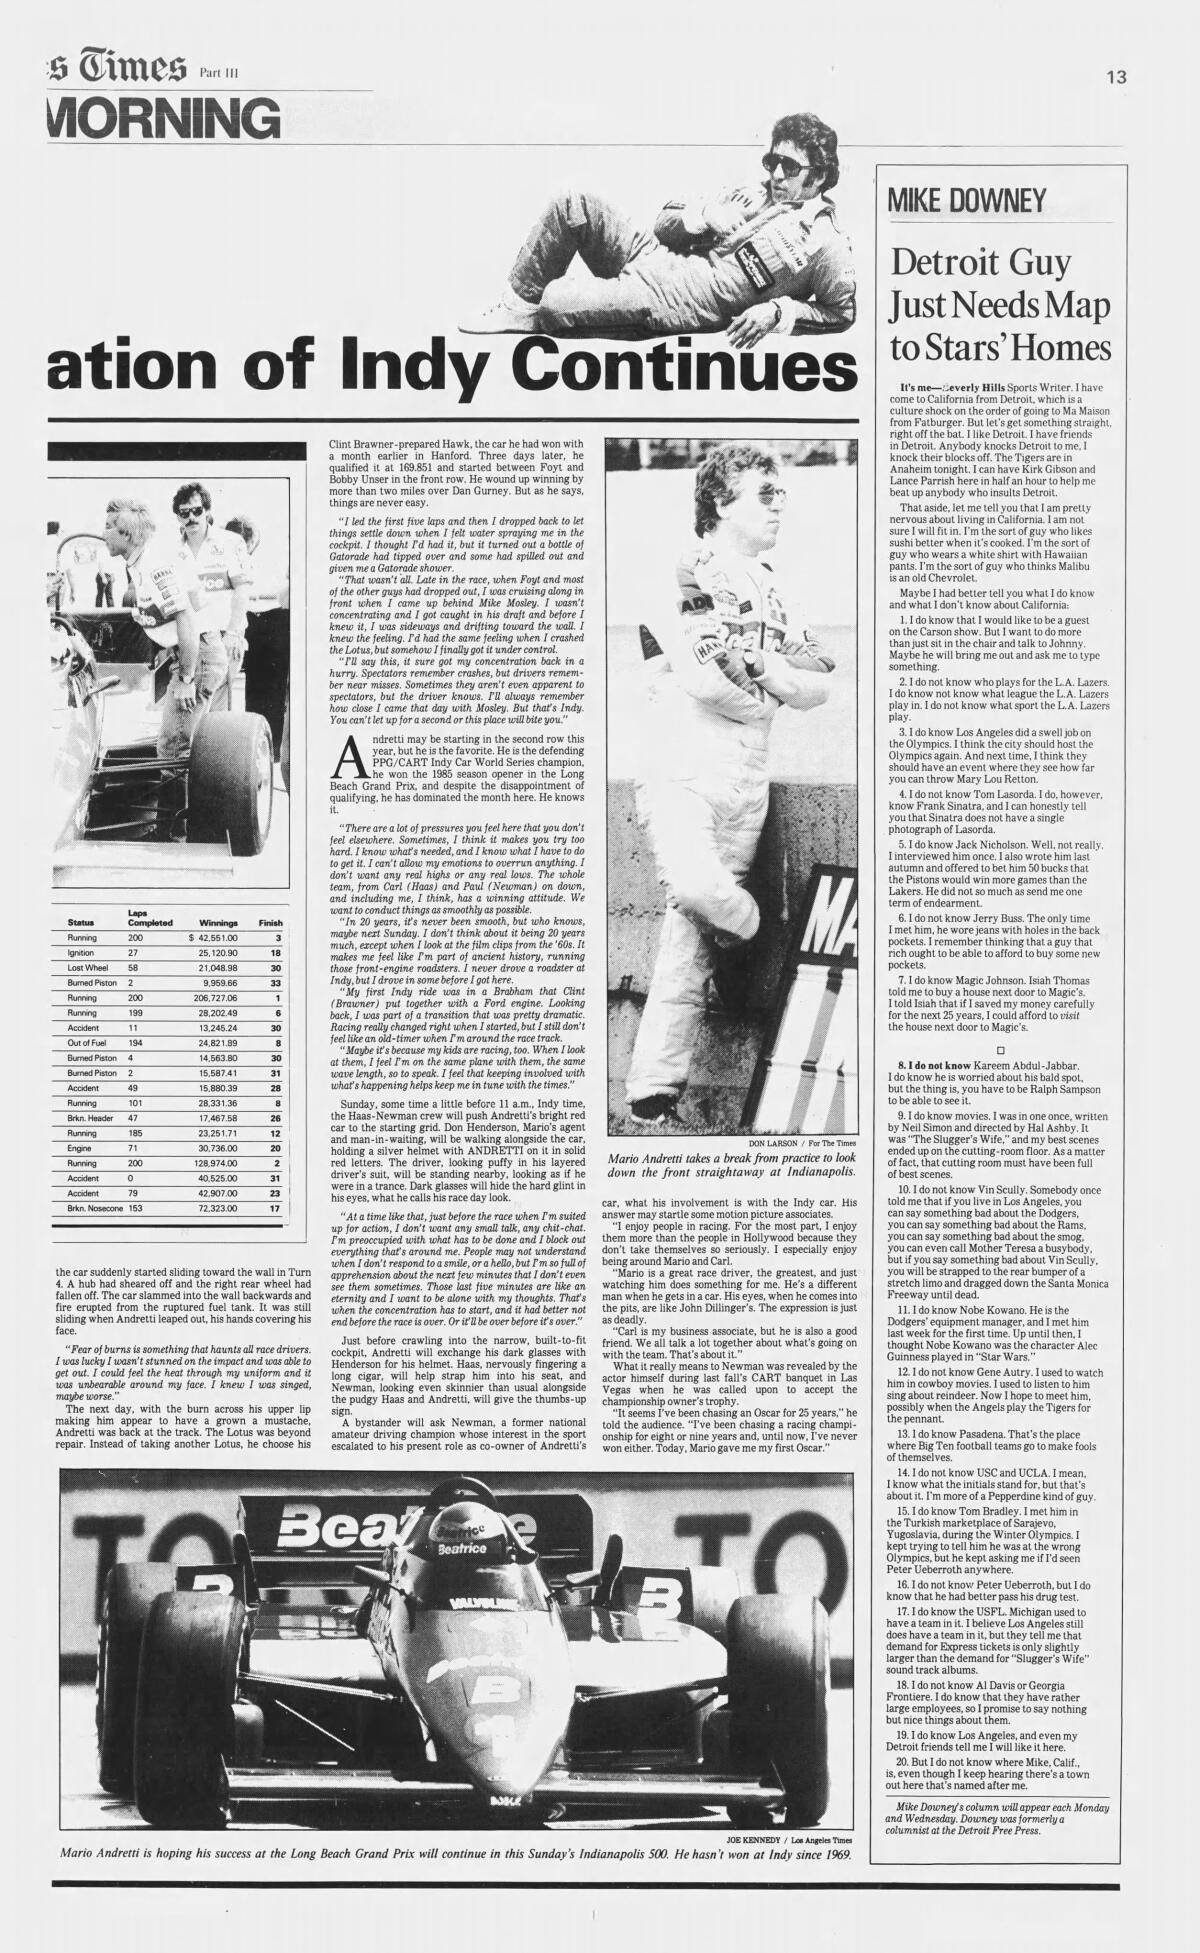 Mike Downey's first column in the Los Angeles Times appeared on May 20, 1985.